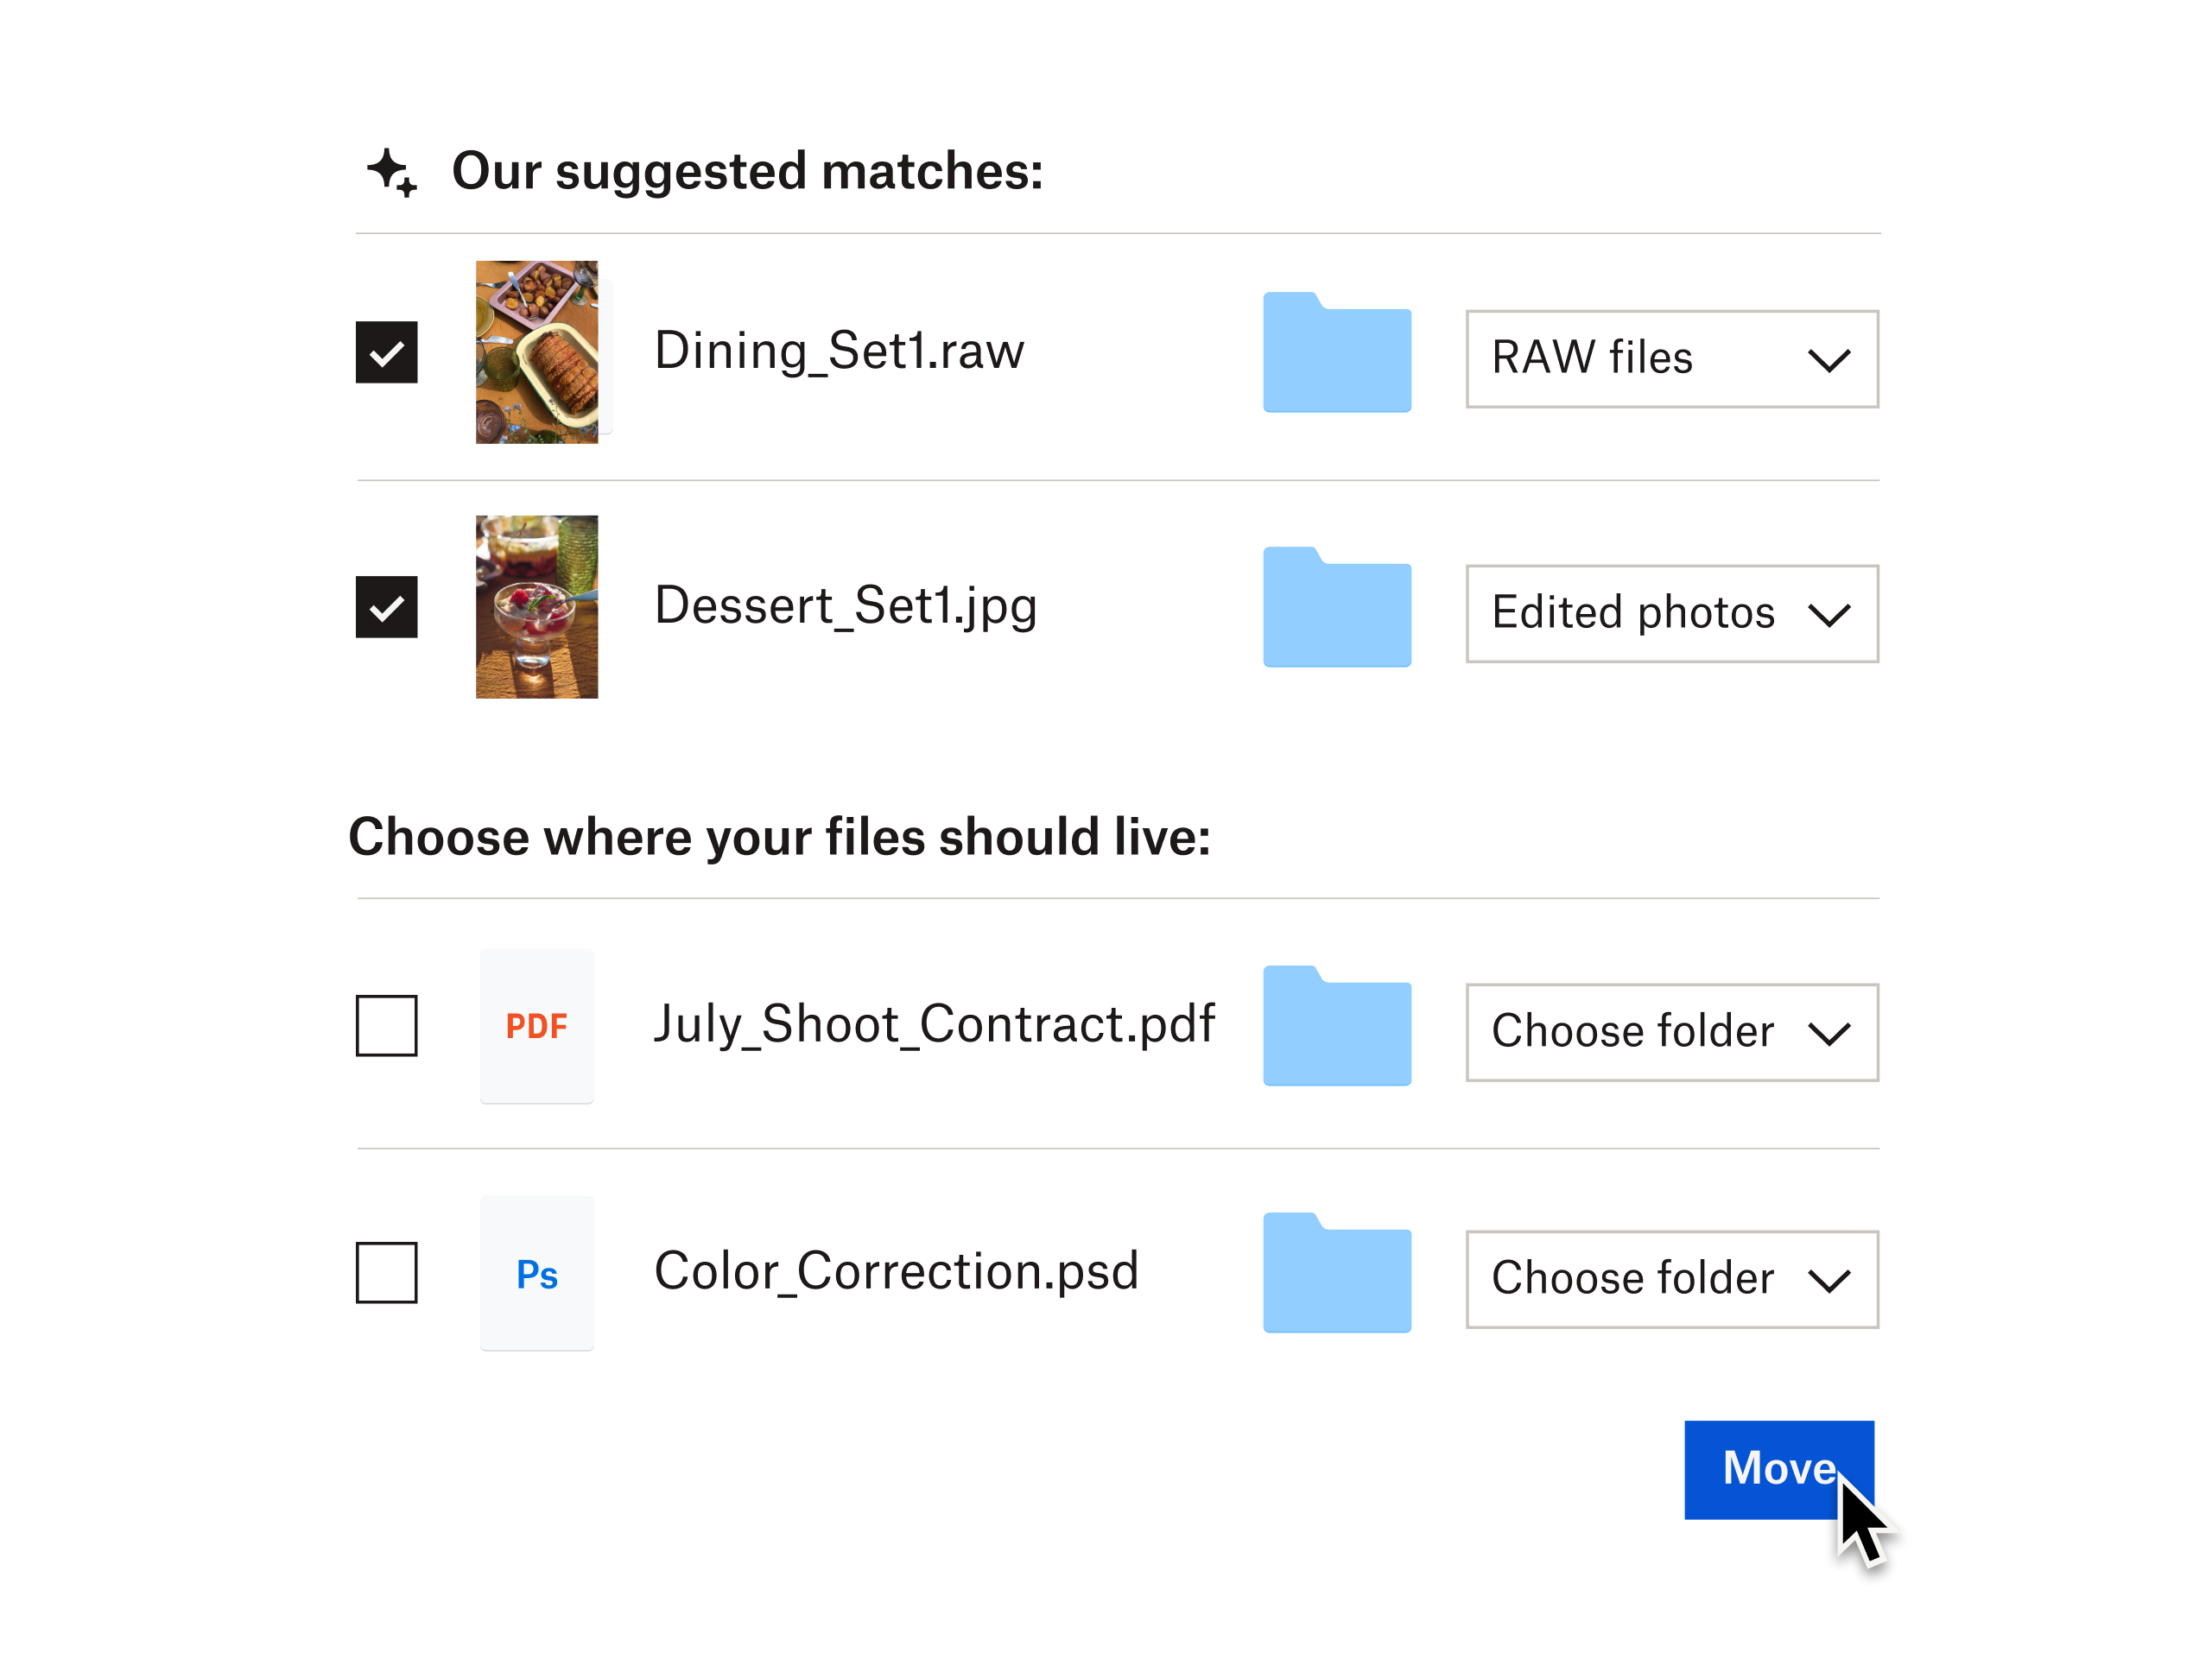 The Dropbox interface in which a user is presented with options for moving multiple files